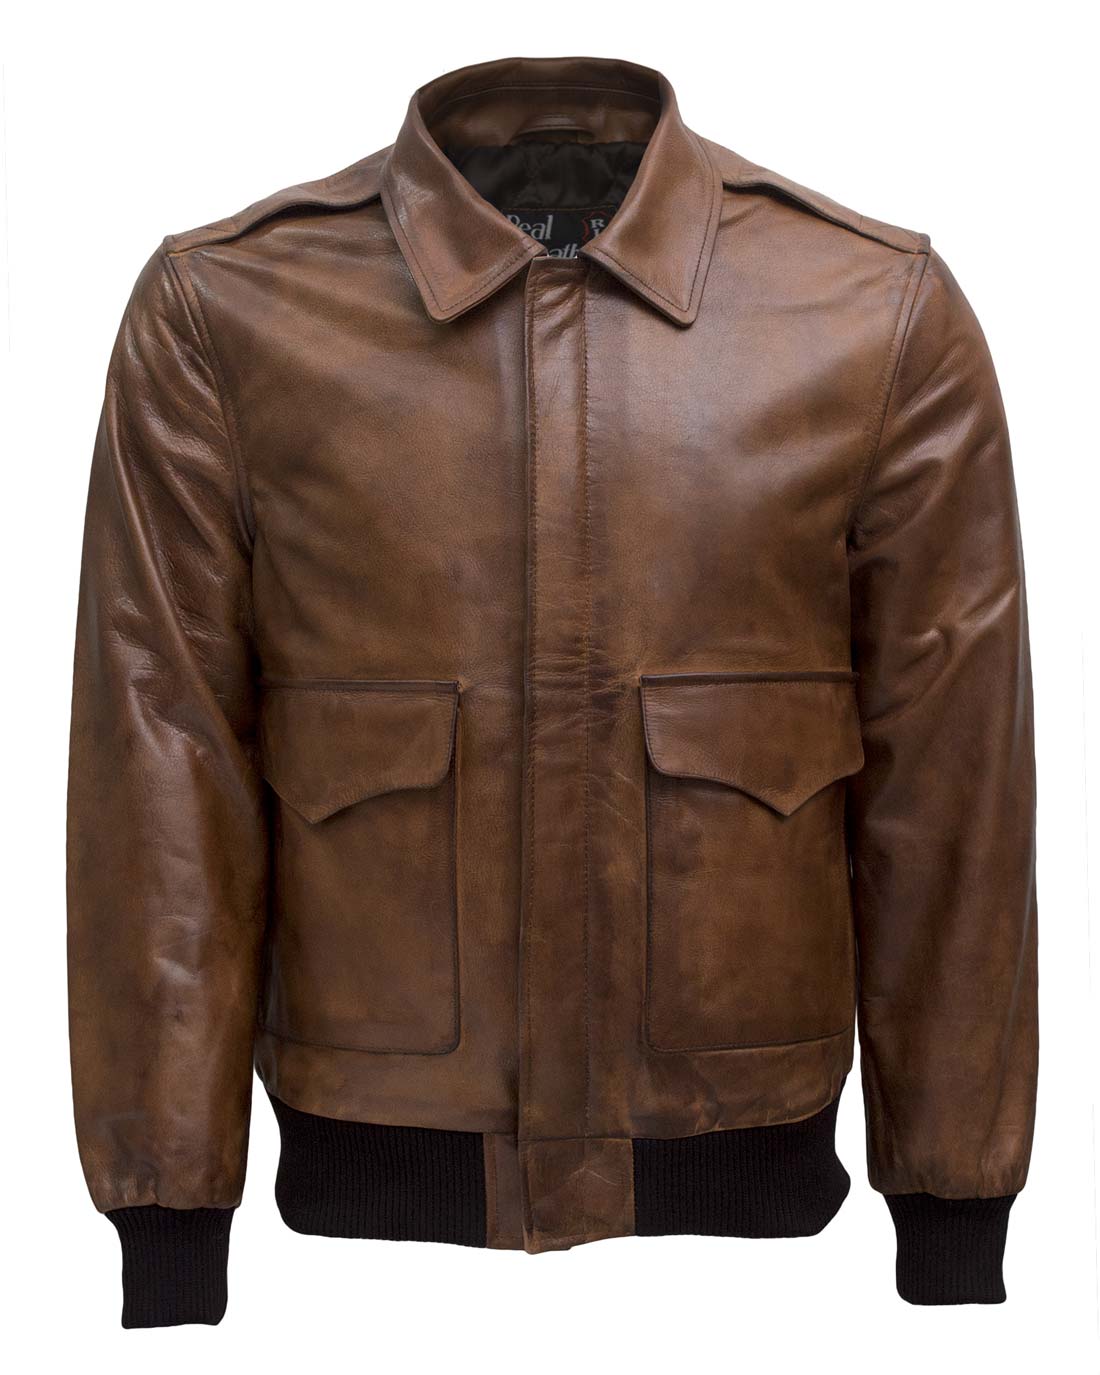 Pat A-2 Brown Leather Bomber Jacket Mens for Sale | Xtreme Jackets